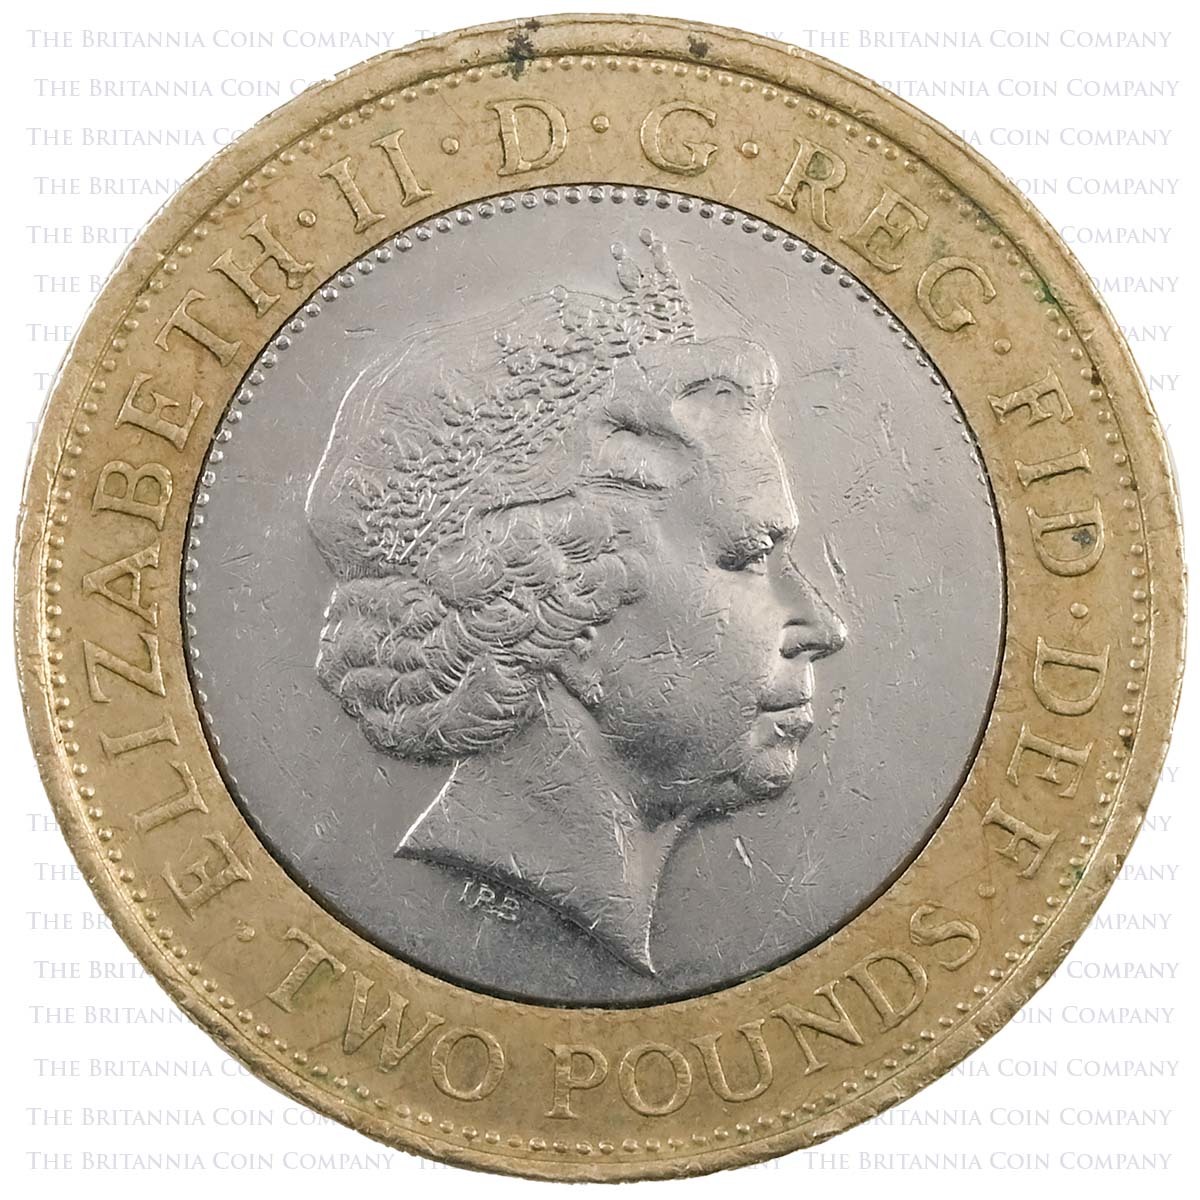 2007 Abolition Of The Slave Trade UK £2 Coin Obverse